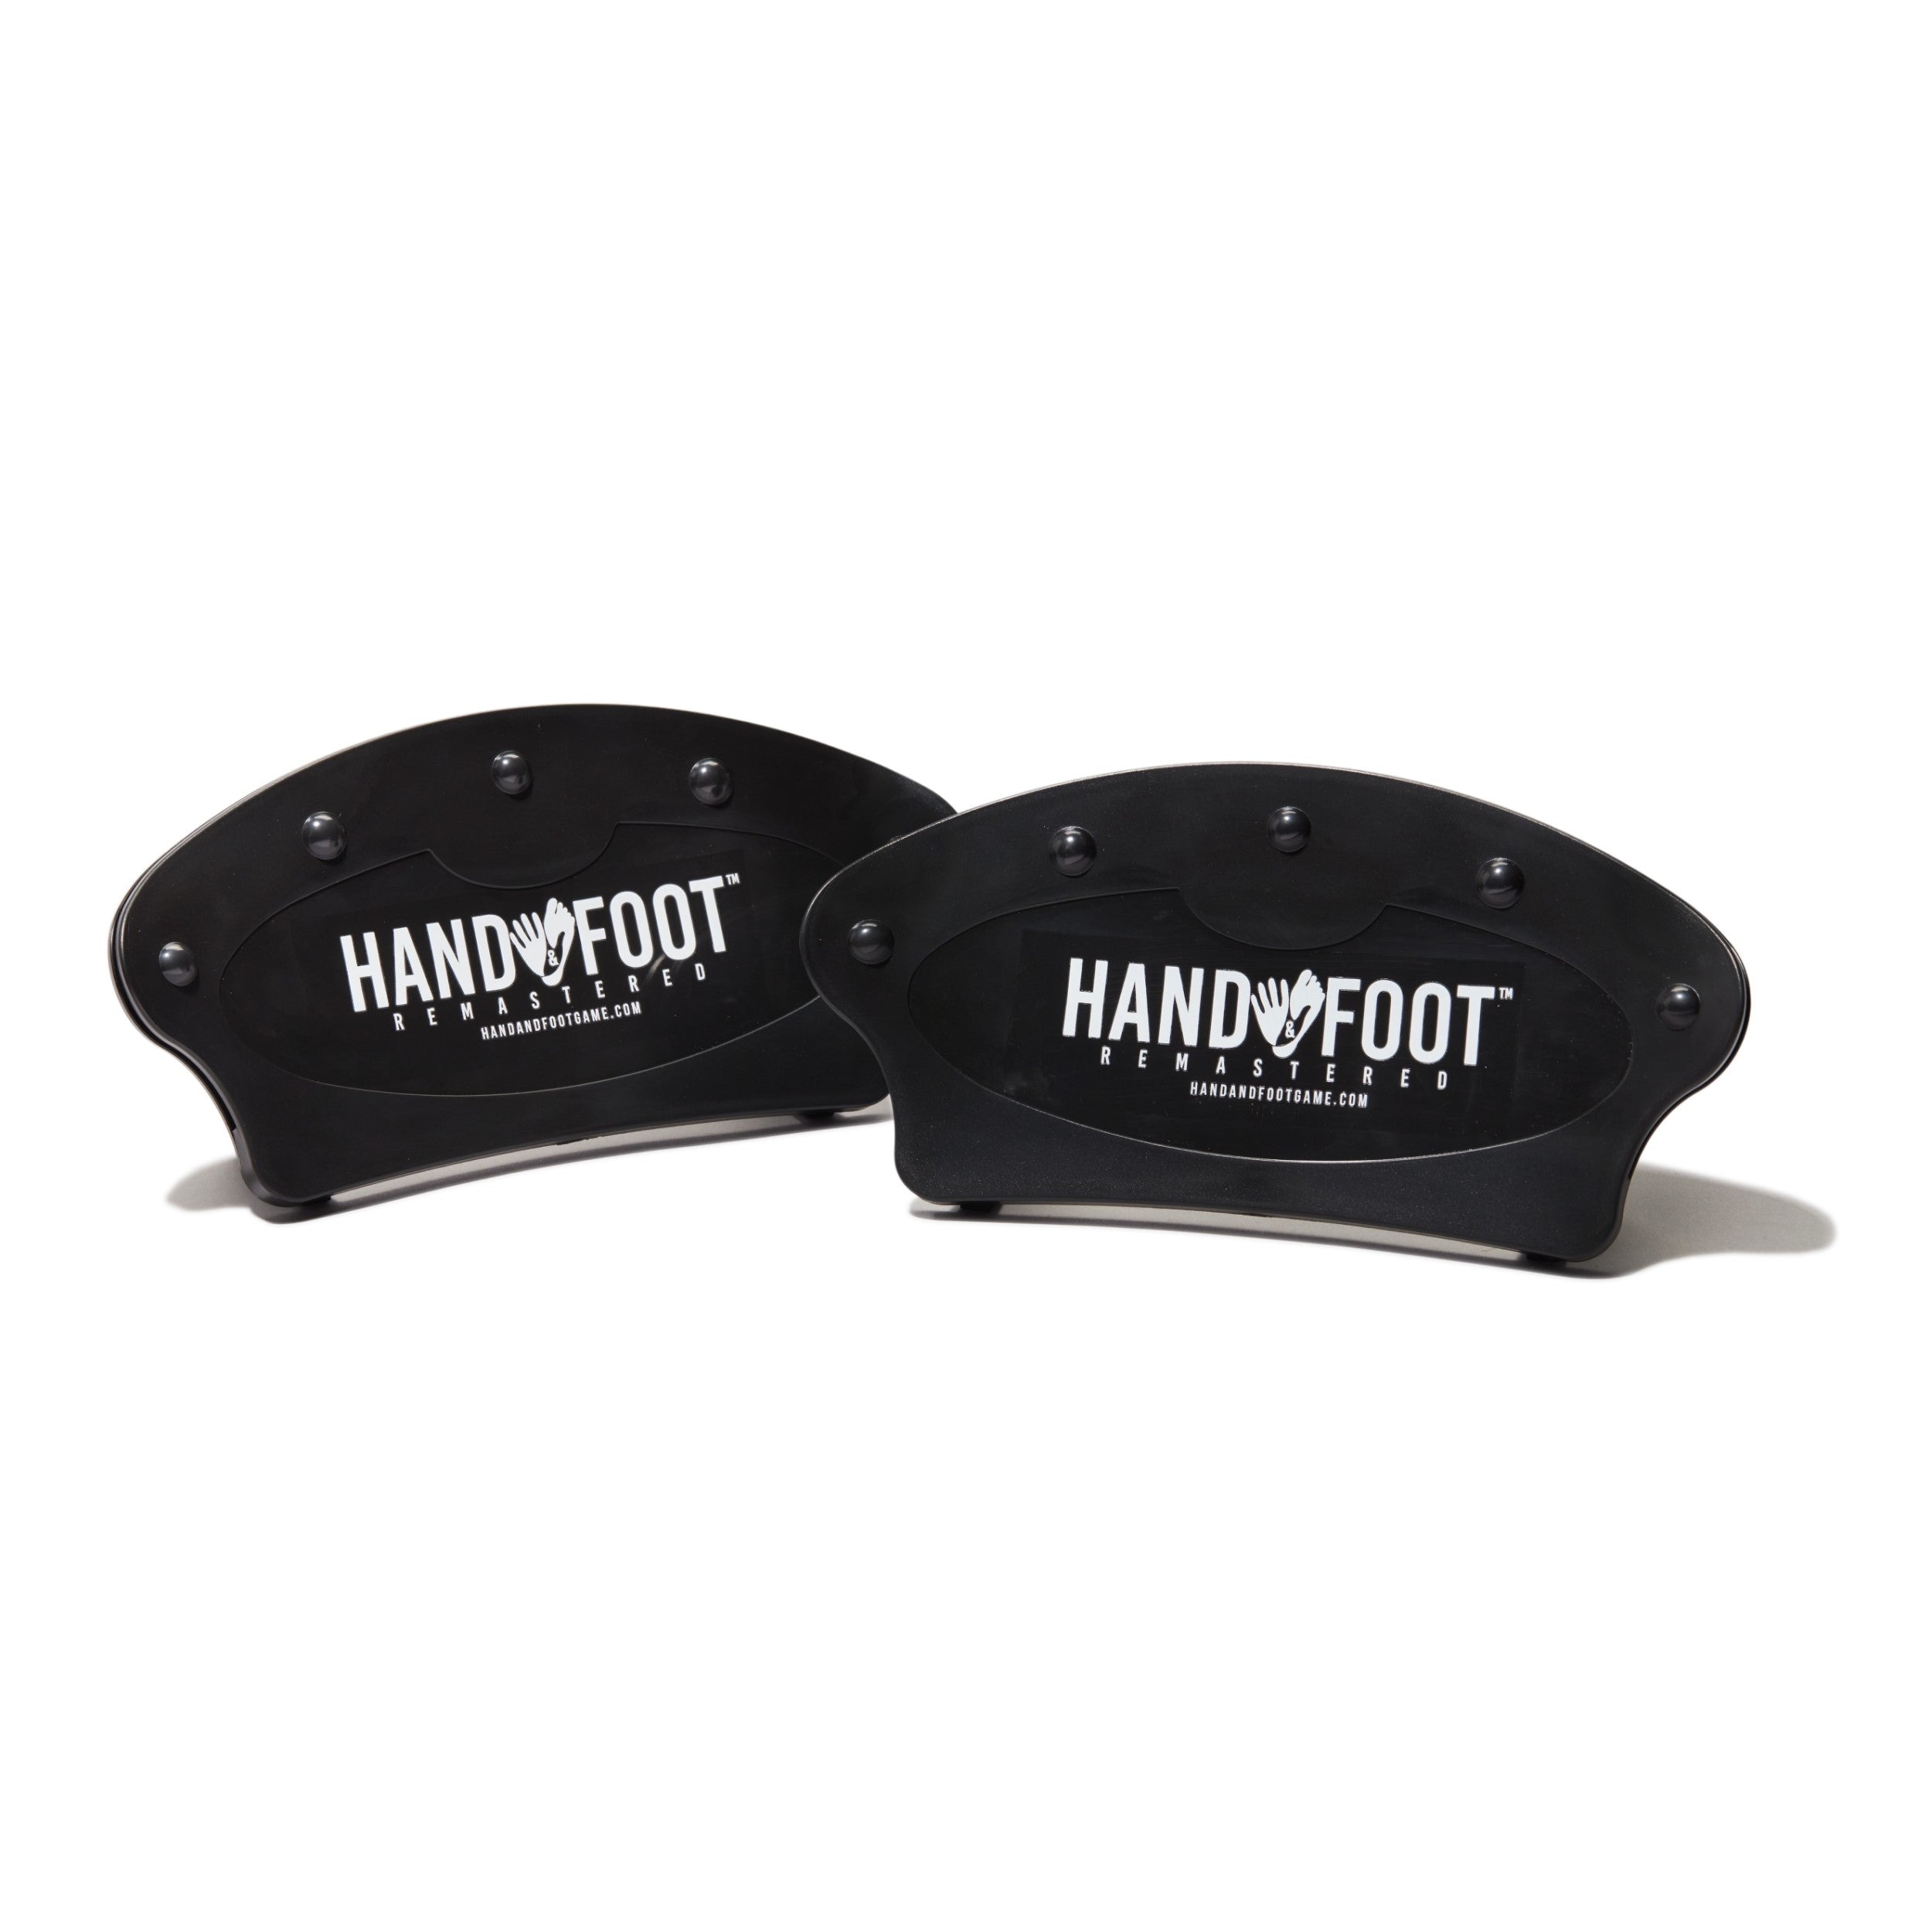 Hand & Foot Remastered Game Night Gift Set